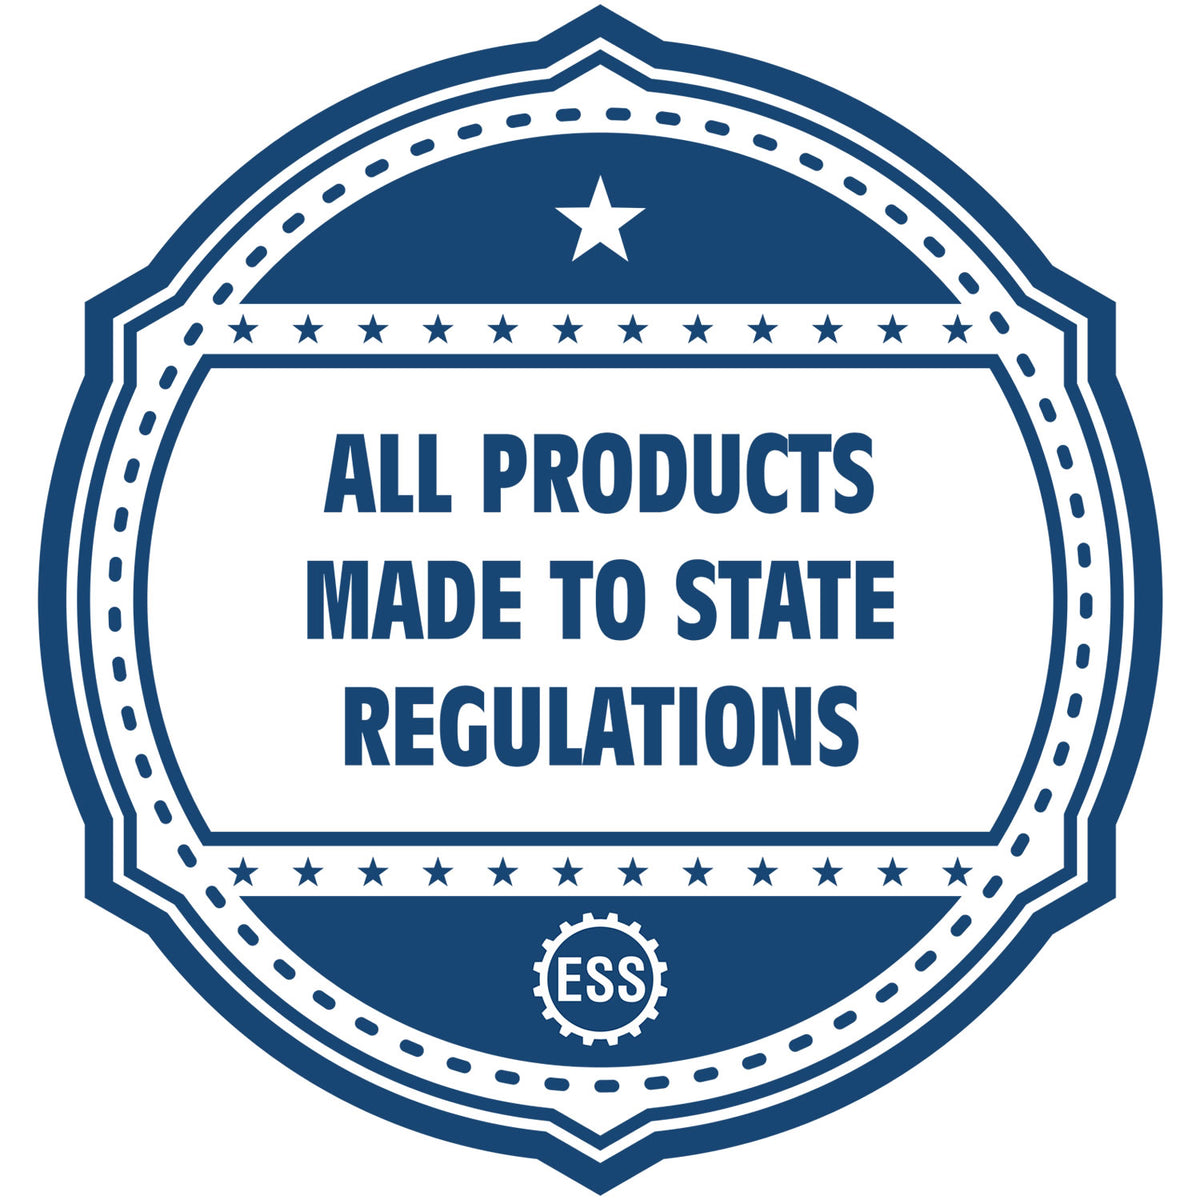 An icon or badge element for the Handheld Minnesota Professional Engineer Embosser showing that this product is made in compliance with state regulations.